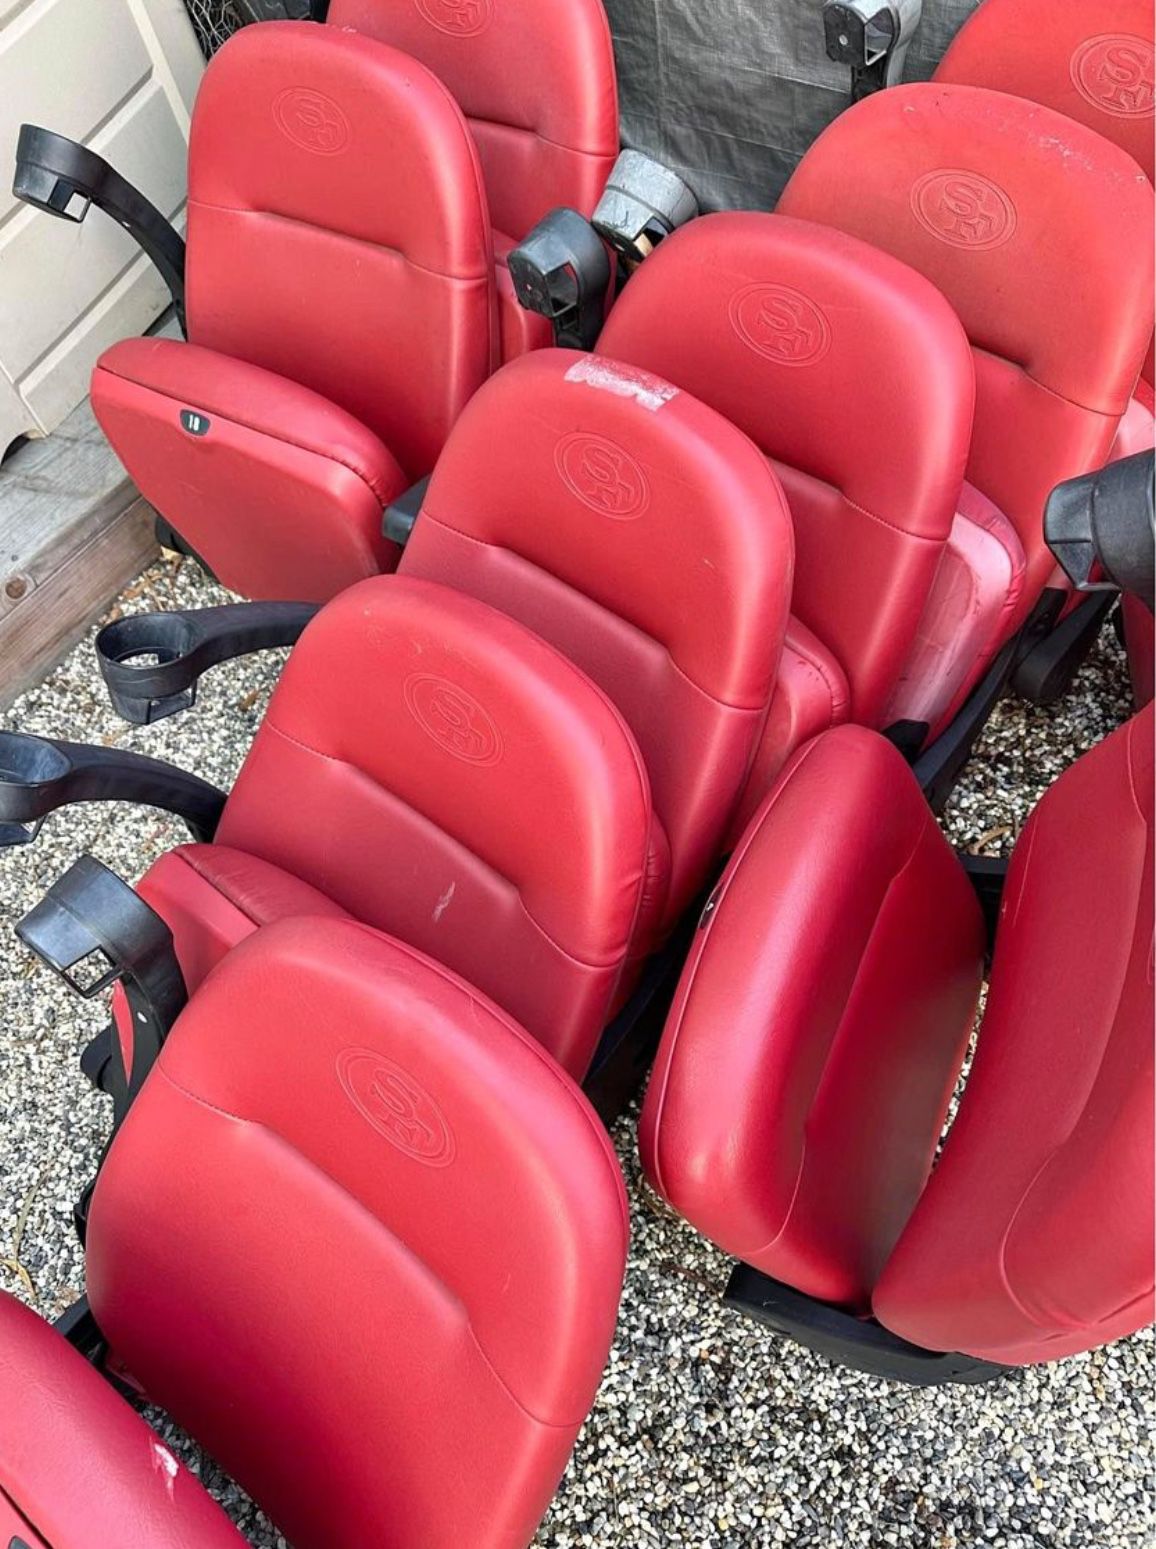 Club seats removed from Levi Stadium suite